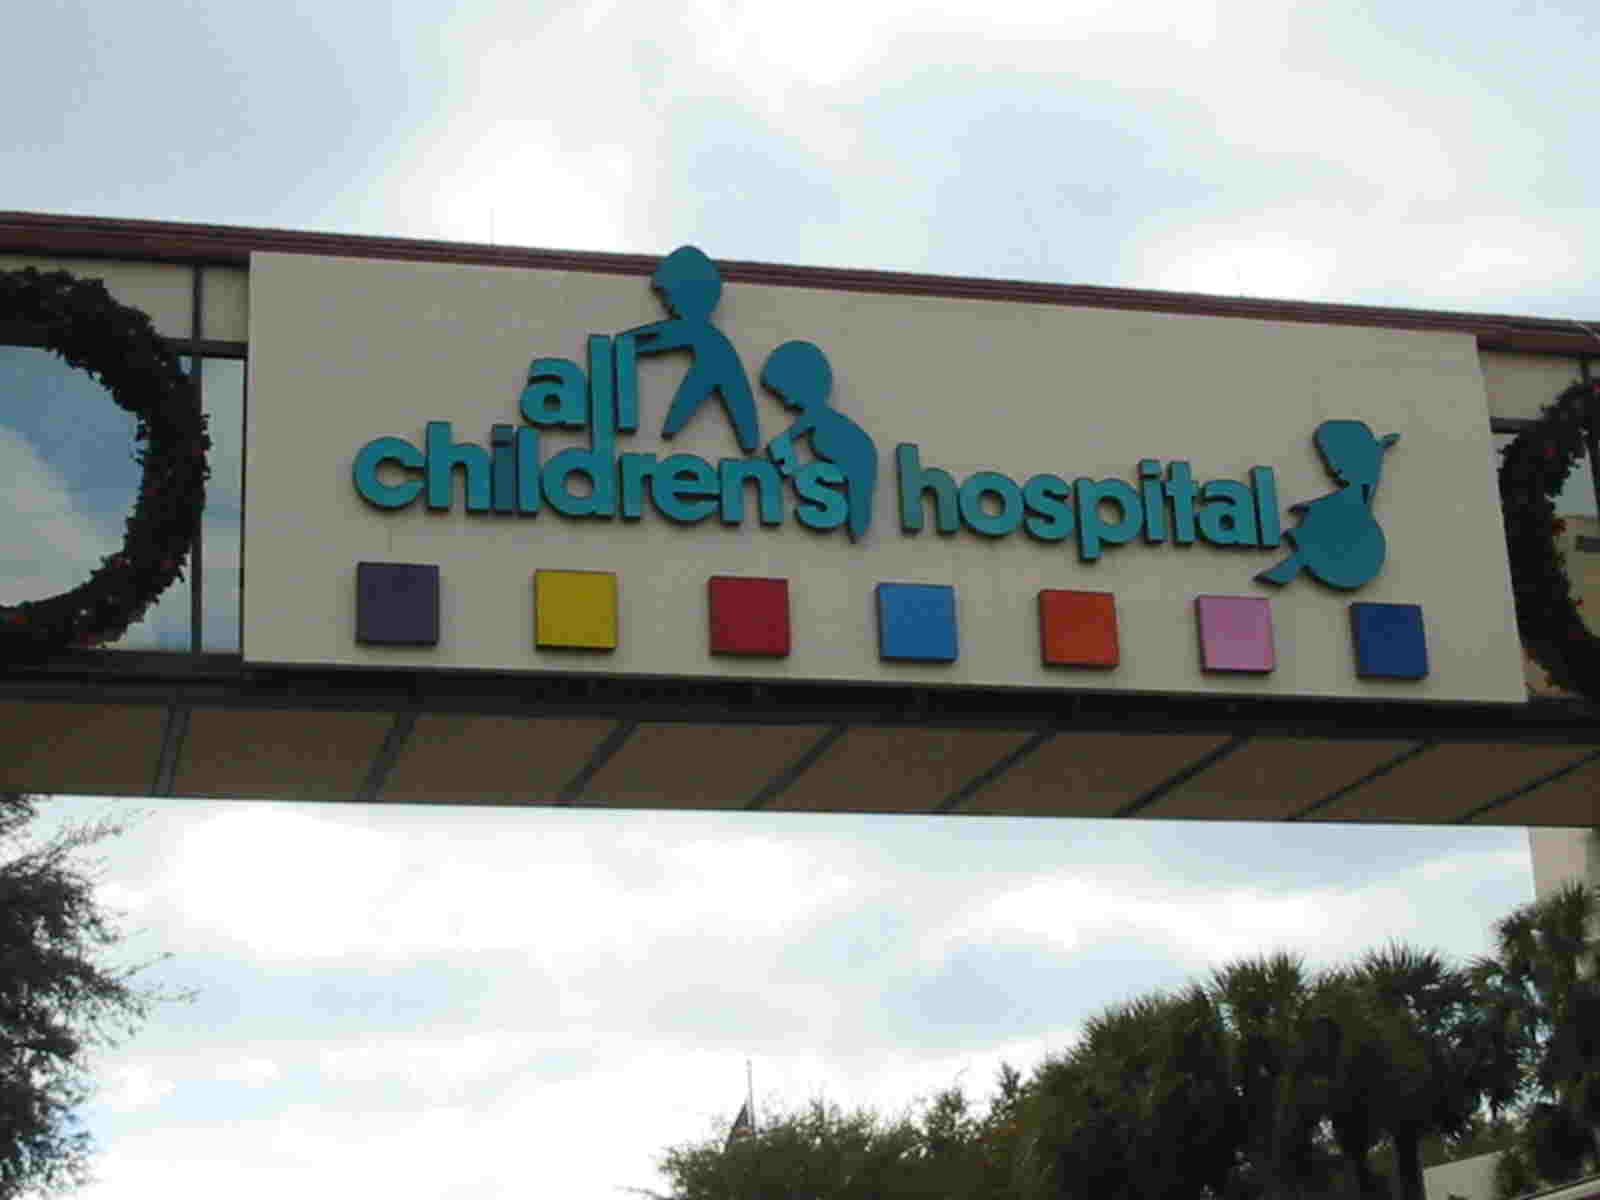 Sign of All Children's Hospital on an overpass above the street